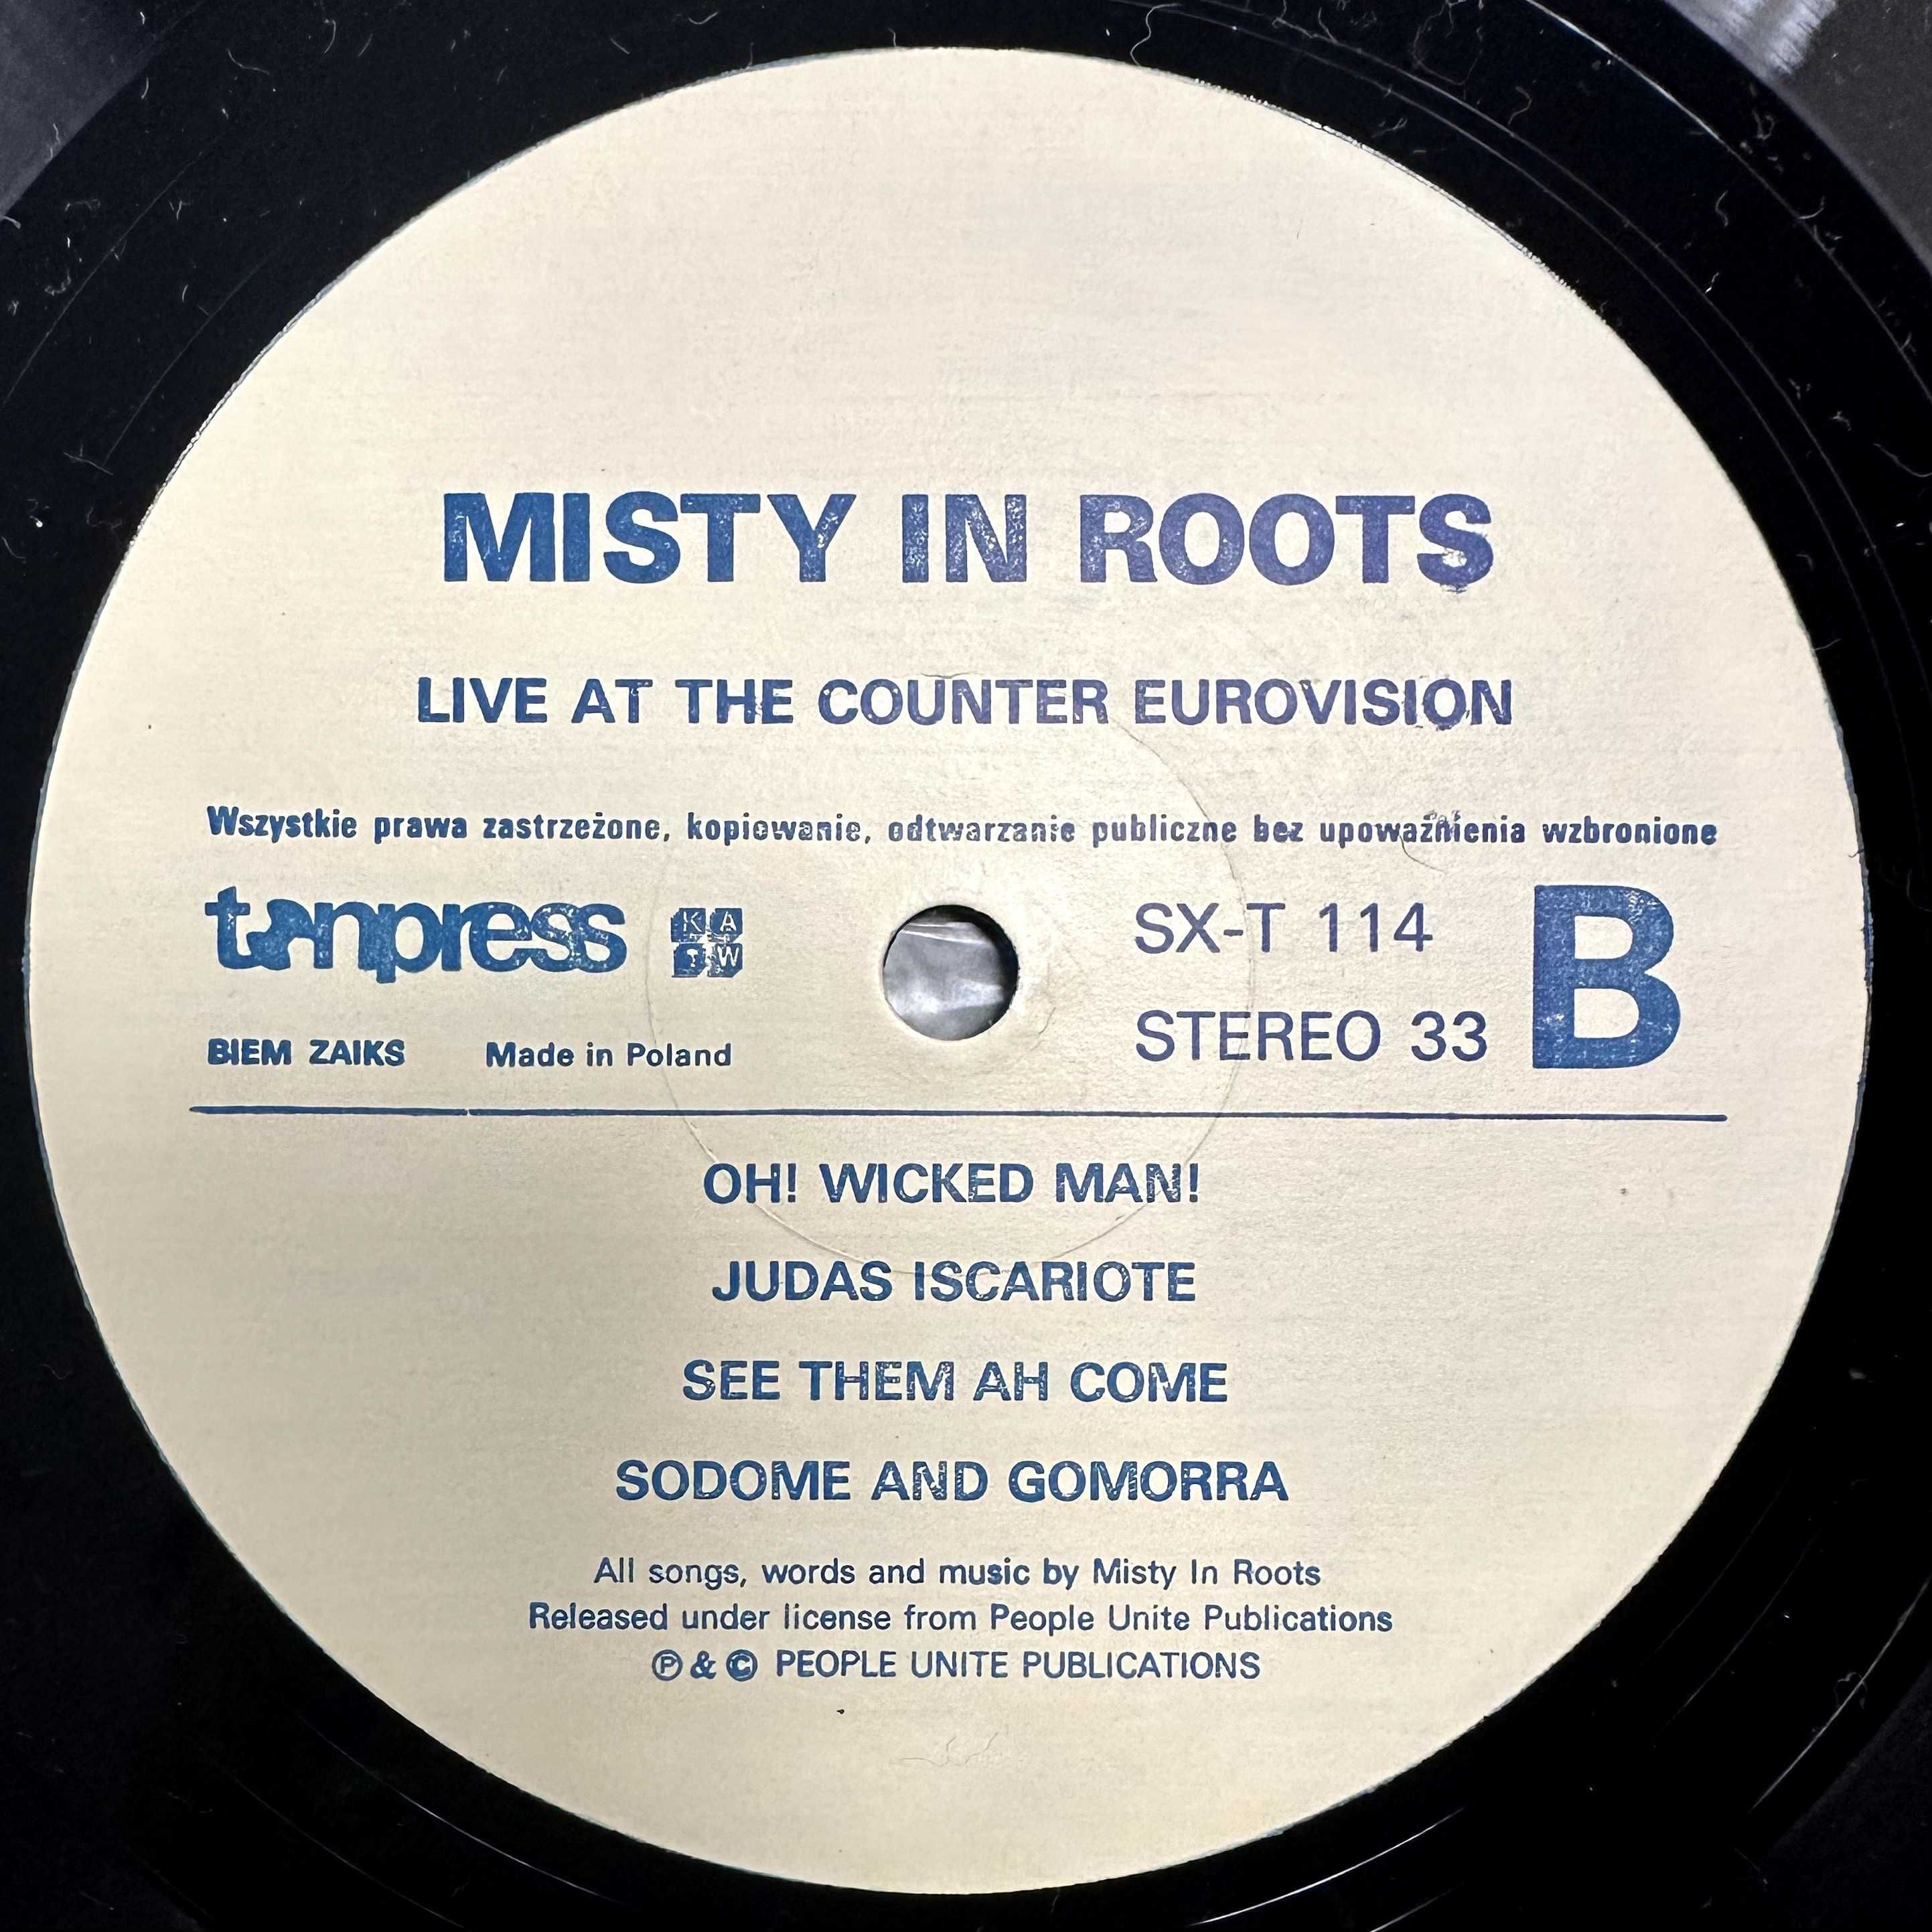 Misty in Roots - Live at the Counter Eurovision (Vinyl, 1979, Poland)